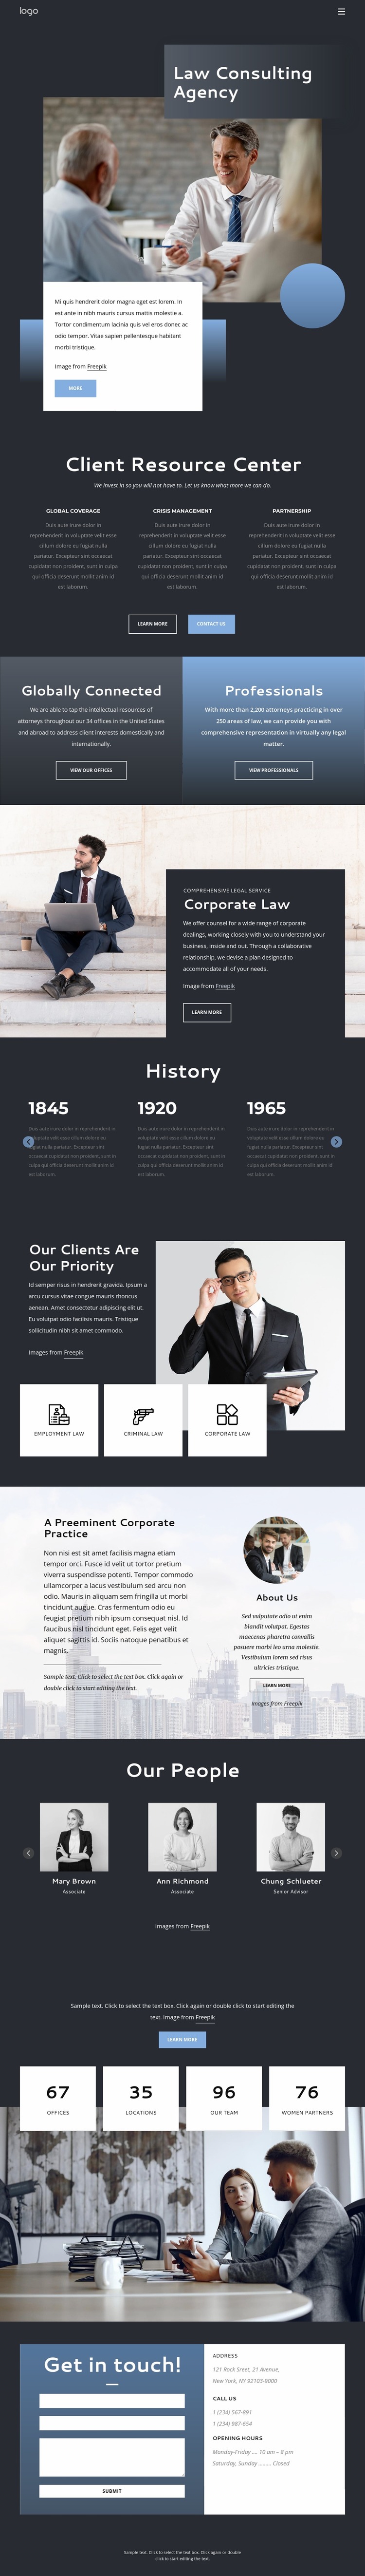 Law consulting agency Website Mockup